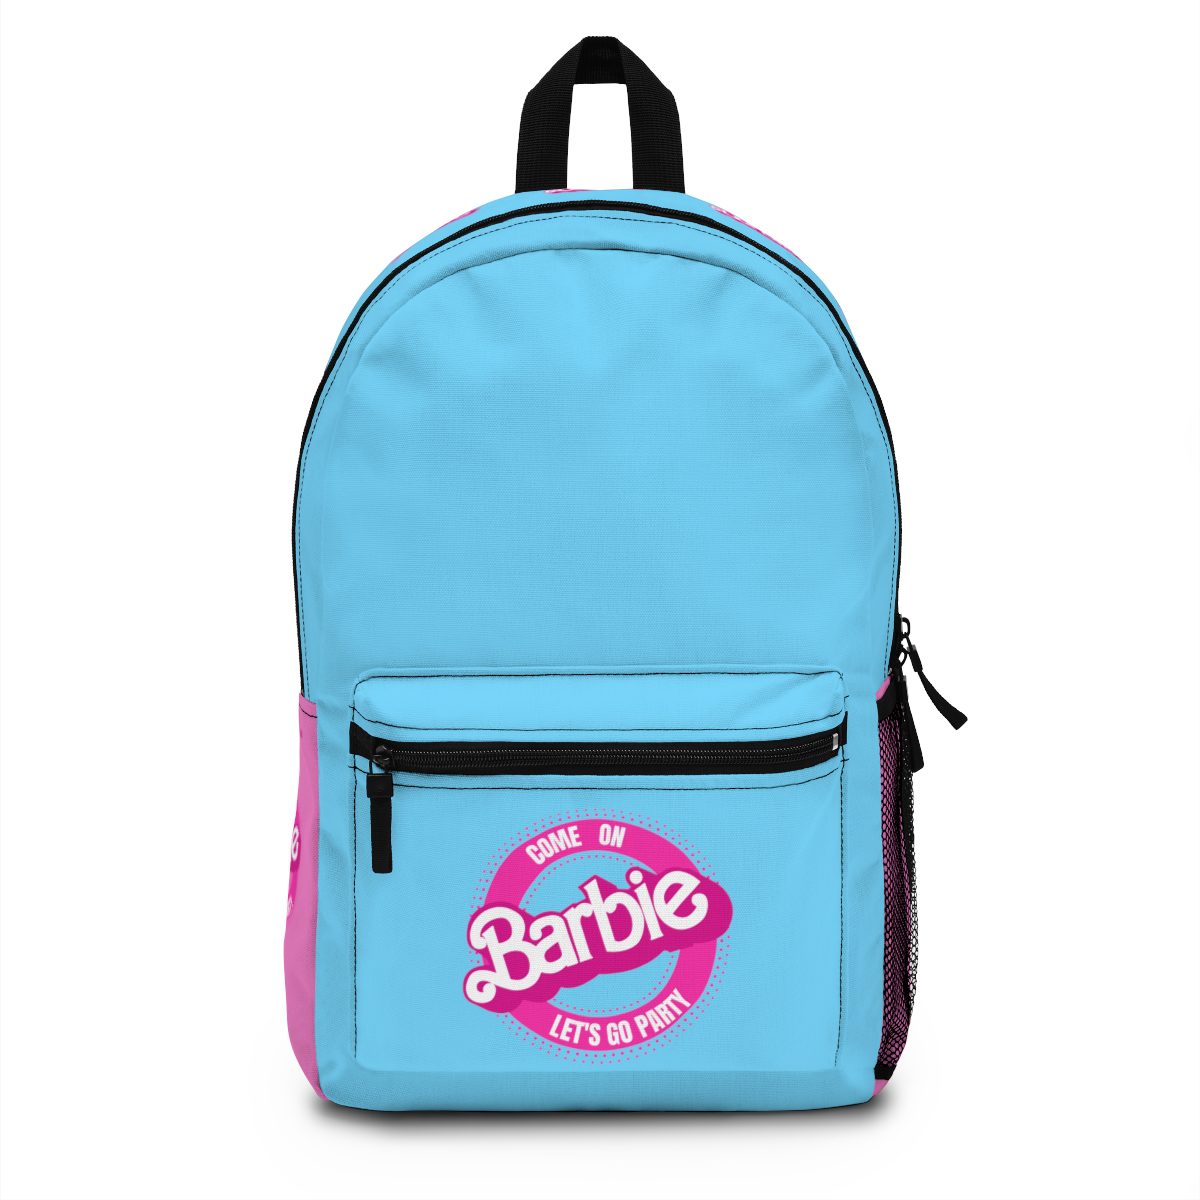 Sky Blue and Pink Barbie Backpack with Circular Logo Cool Kiddo